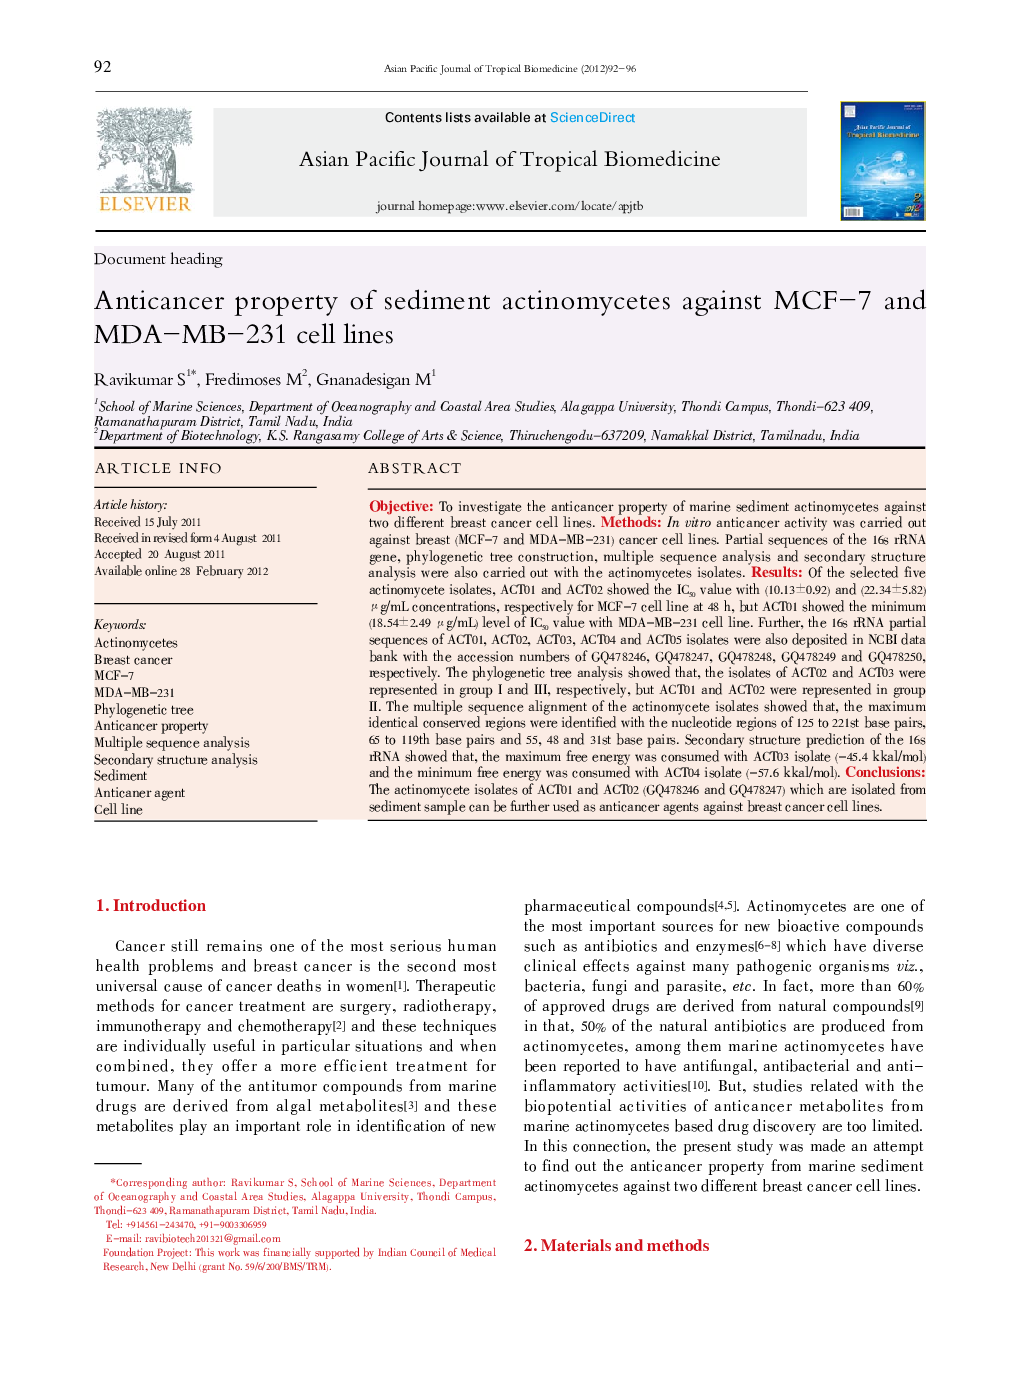 Anticancer property of sediment actinomycetes against MCF-7 and MDA-MB-231 cell lines